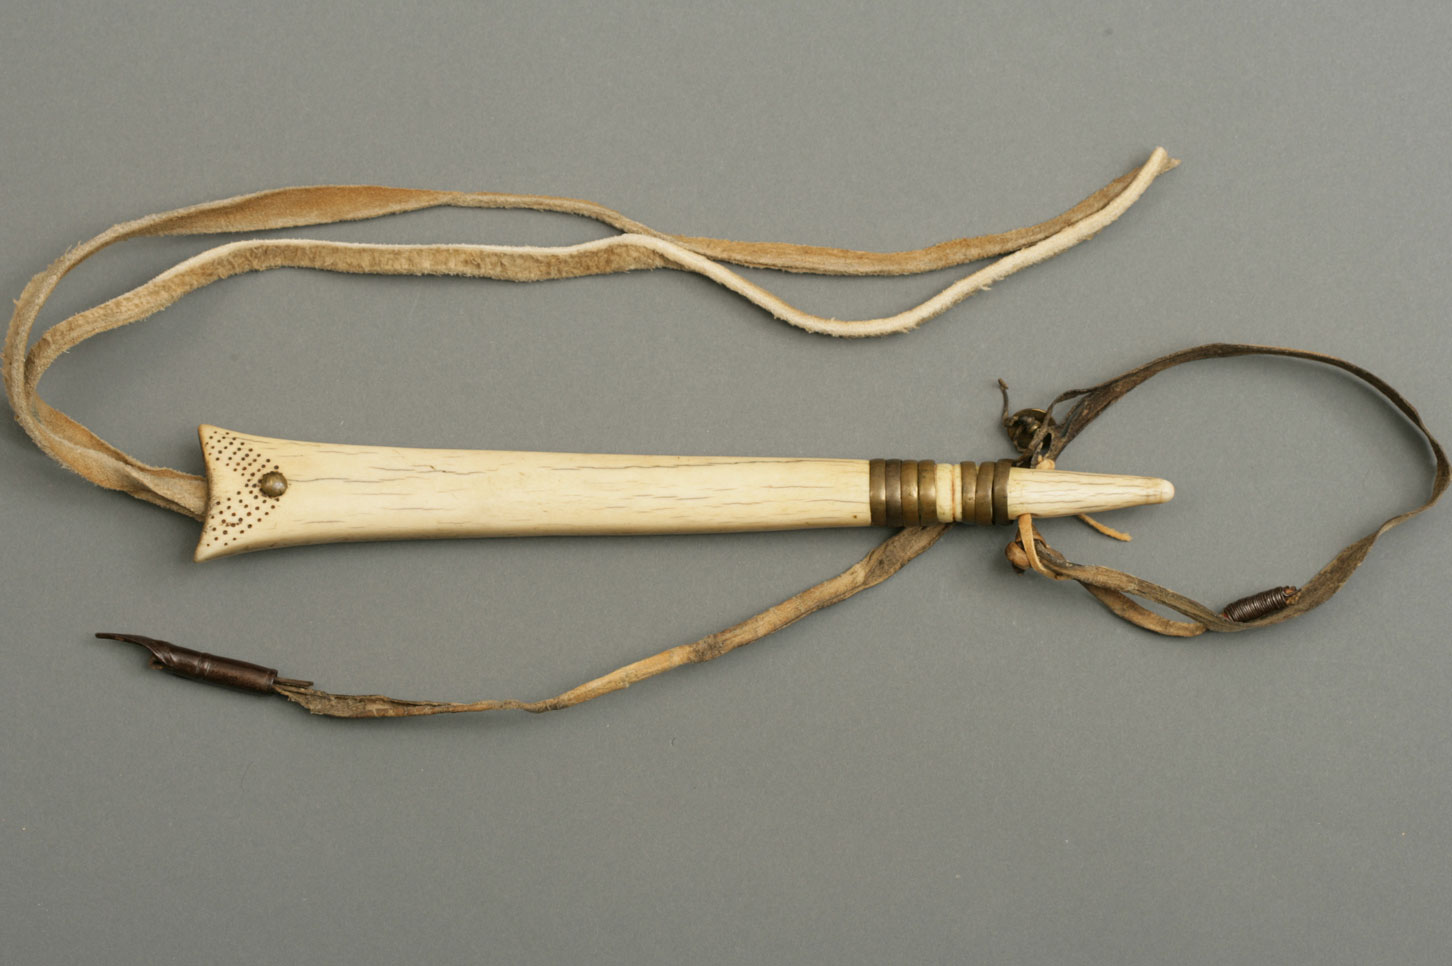 Decorated elk antler horse quirt or whip. The handle is formed of a piece of rawhide thong to which a forged iron ram rod is attached at one end.